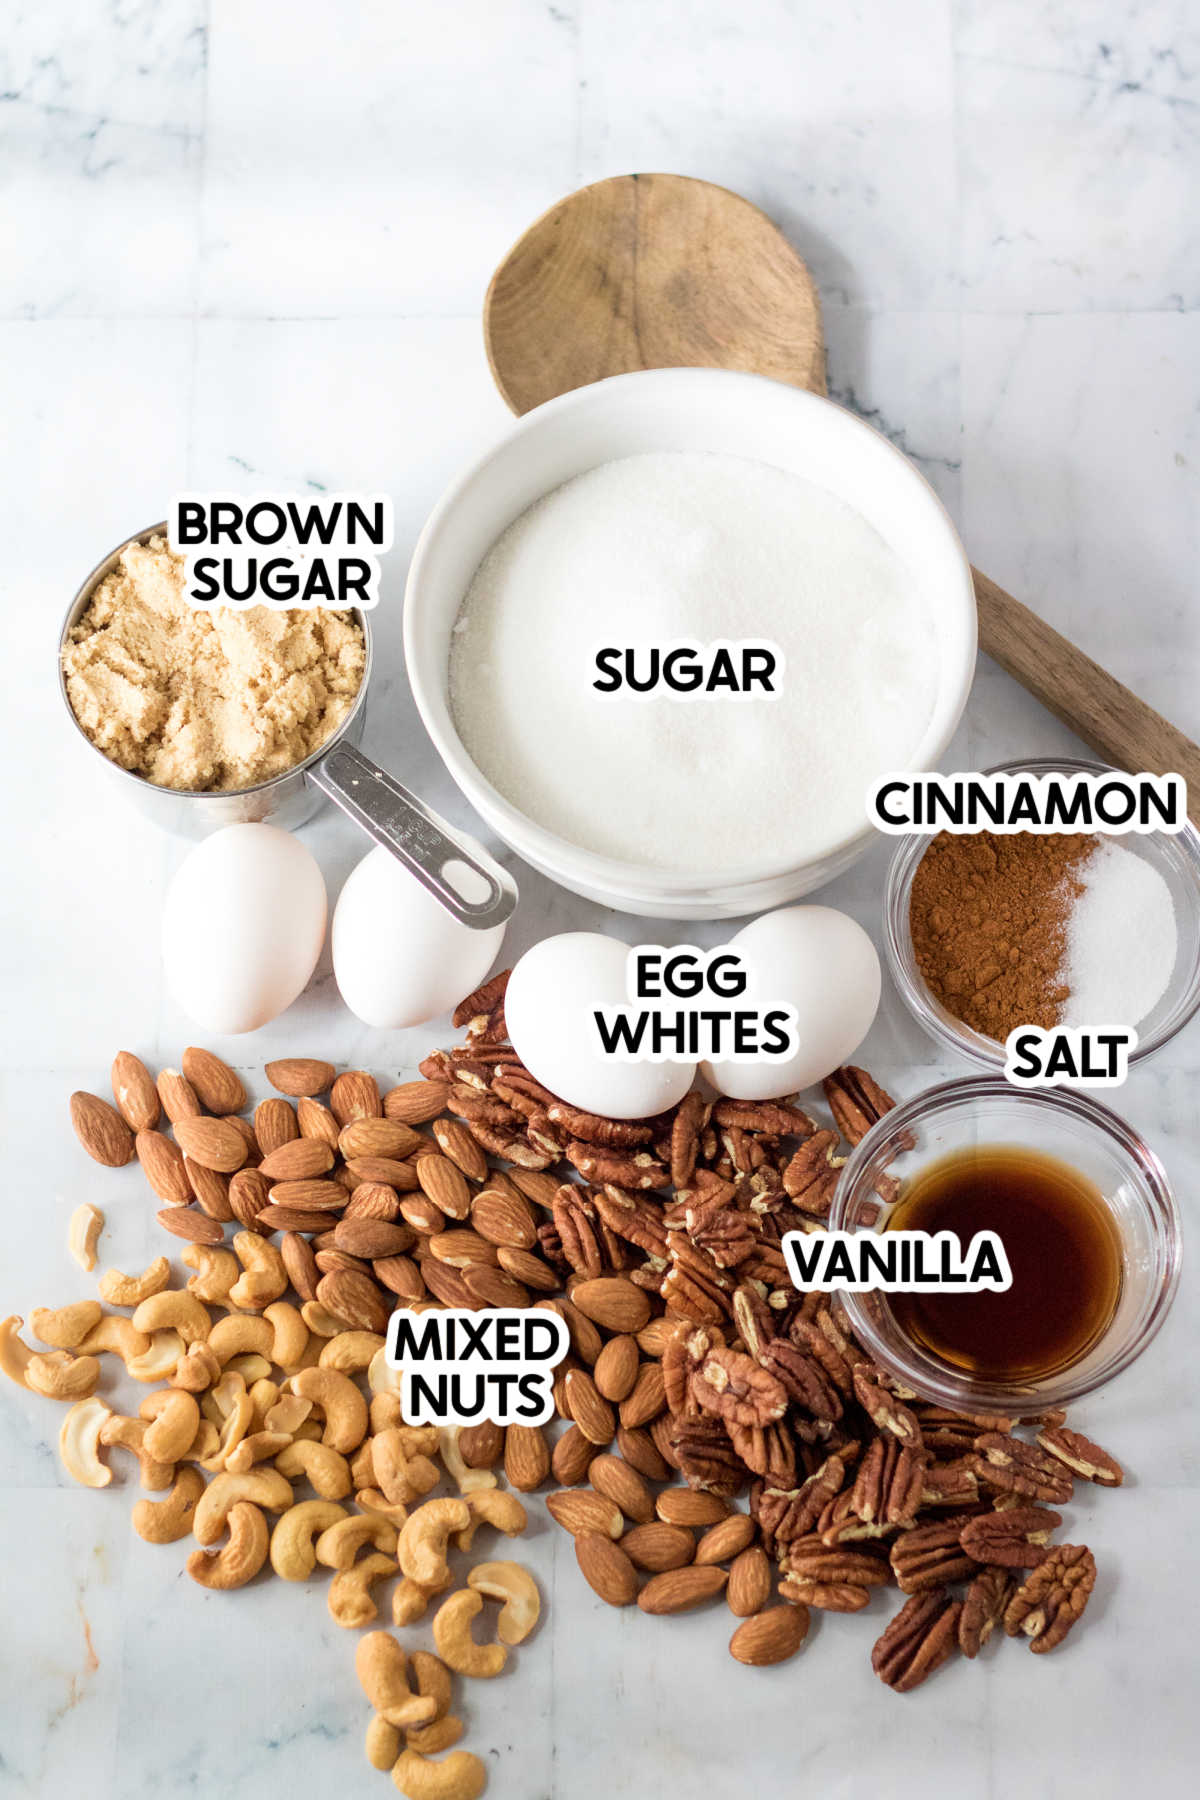 ingredients needed to make candied nuts